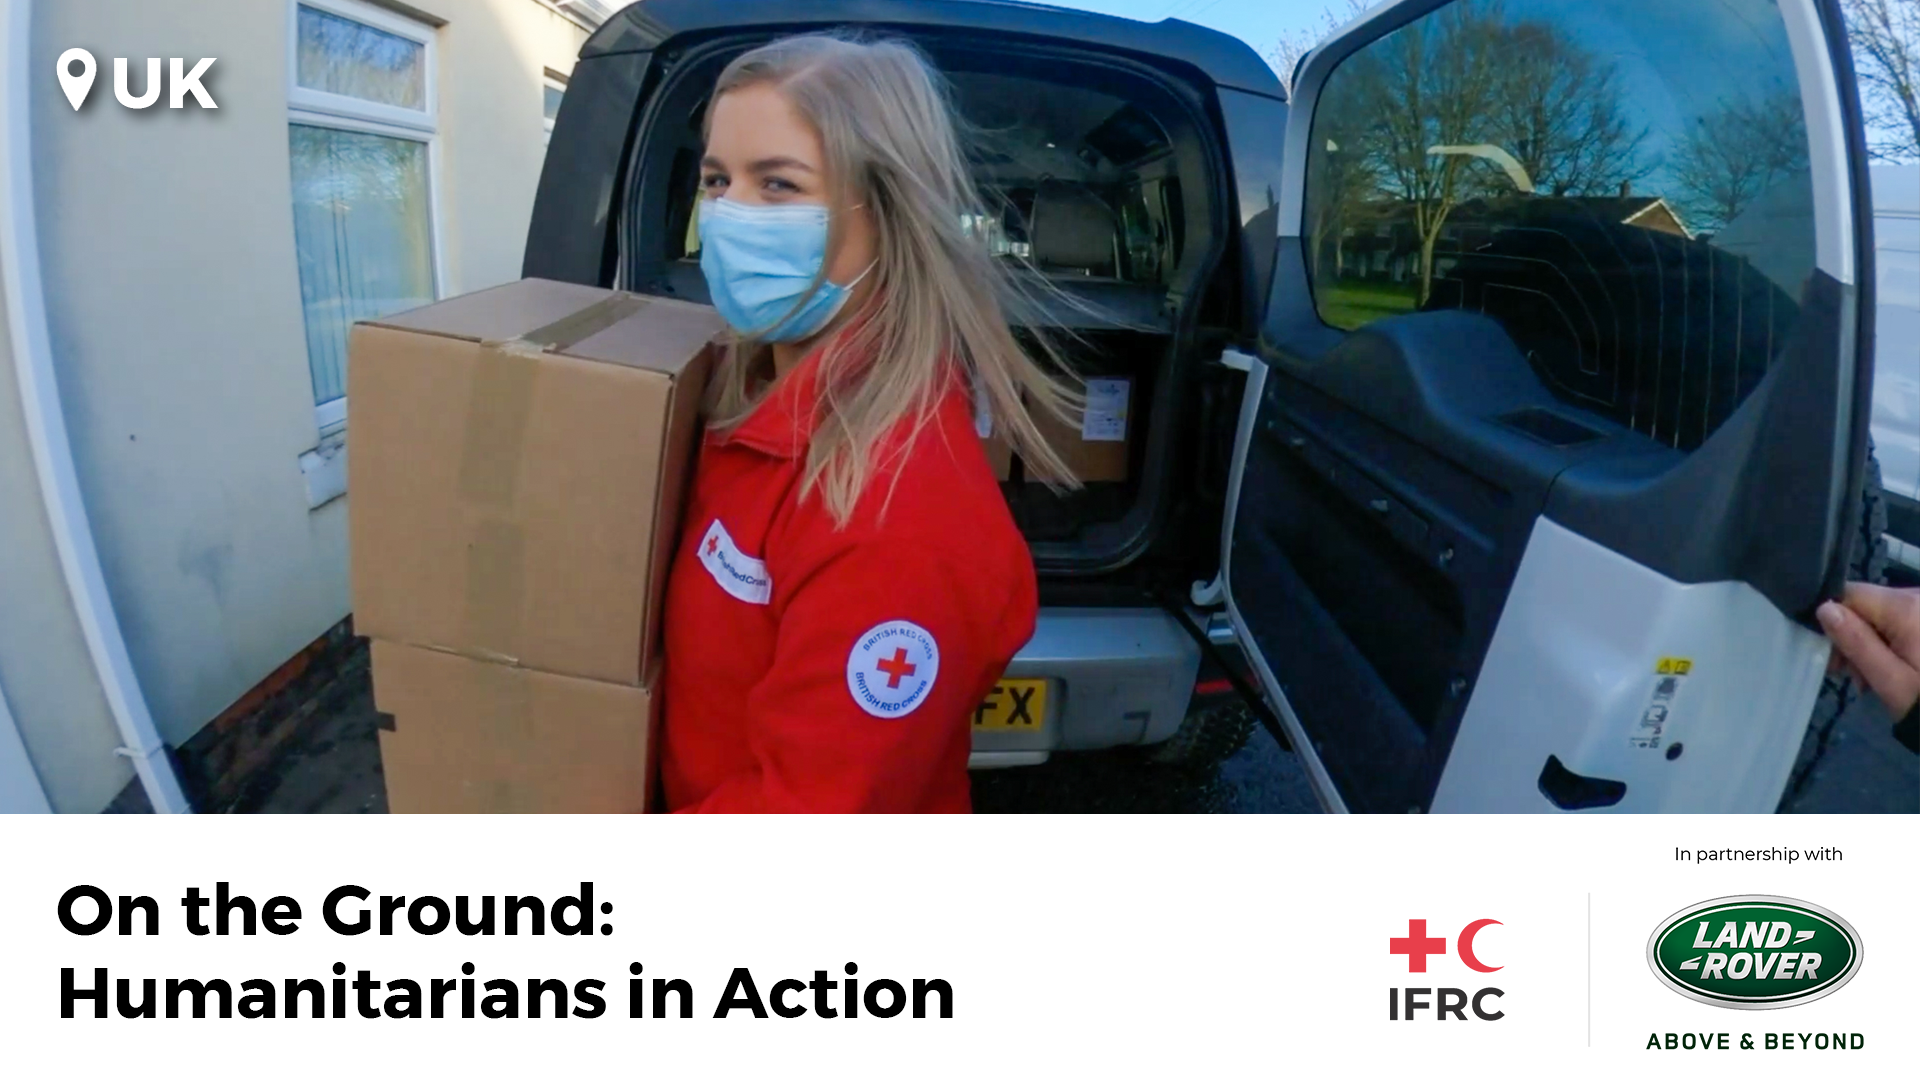 In a thumbnail for the On the Ground: Humanitarians in Action film, a British Red Cross volunteer is seen taking a box of PPE out of the boot of a Land Rover vehicle